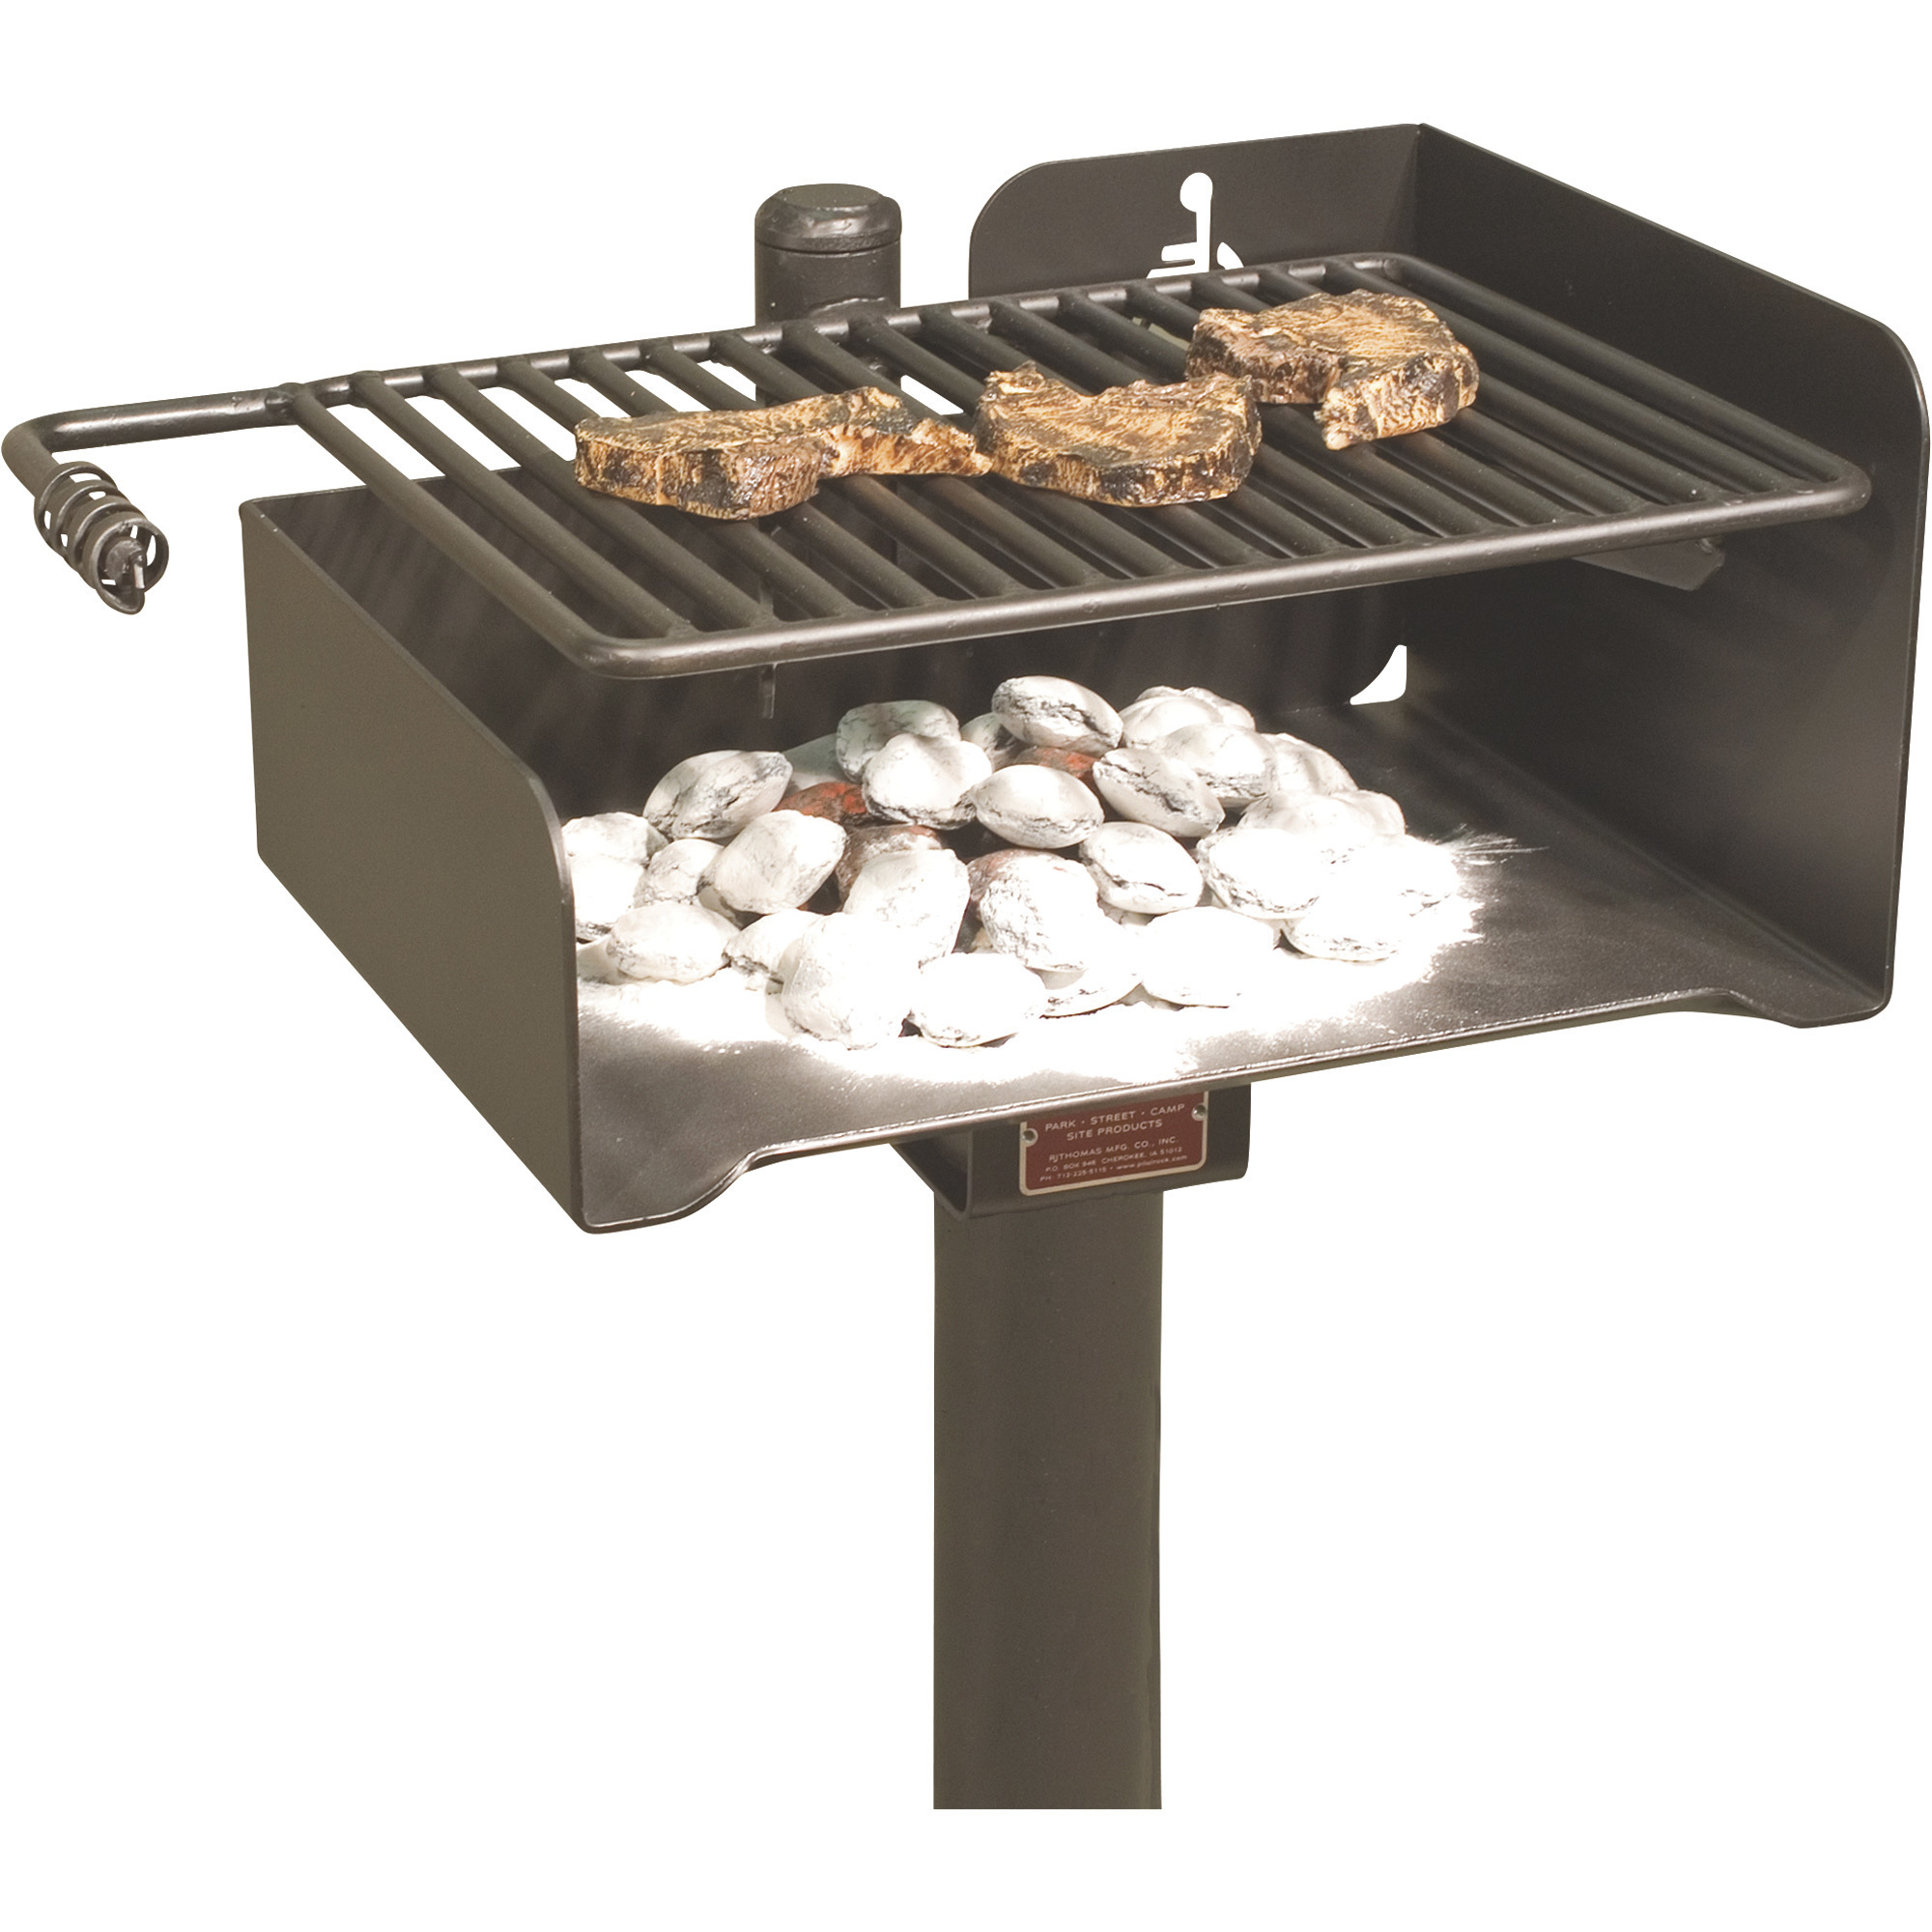 Pilot Rock Park Charcoal Grill with ADA Accommodations â Model ASW-20 B2